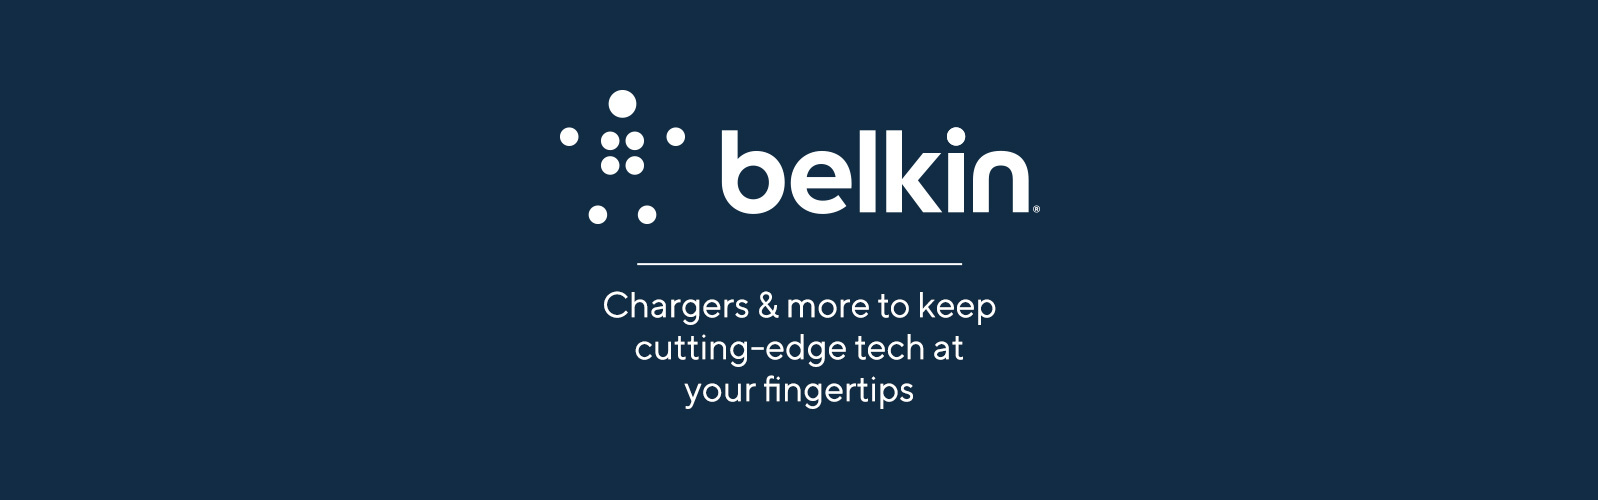 Belkin — Chargers & more to keep cutting-edge tech at your fingertips